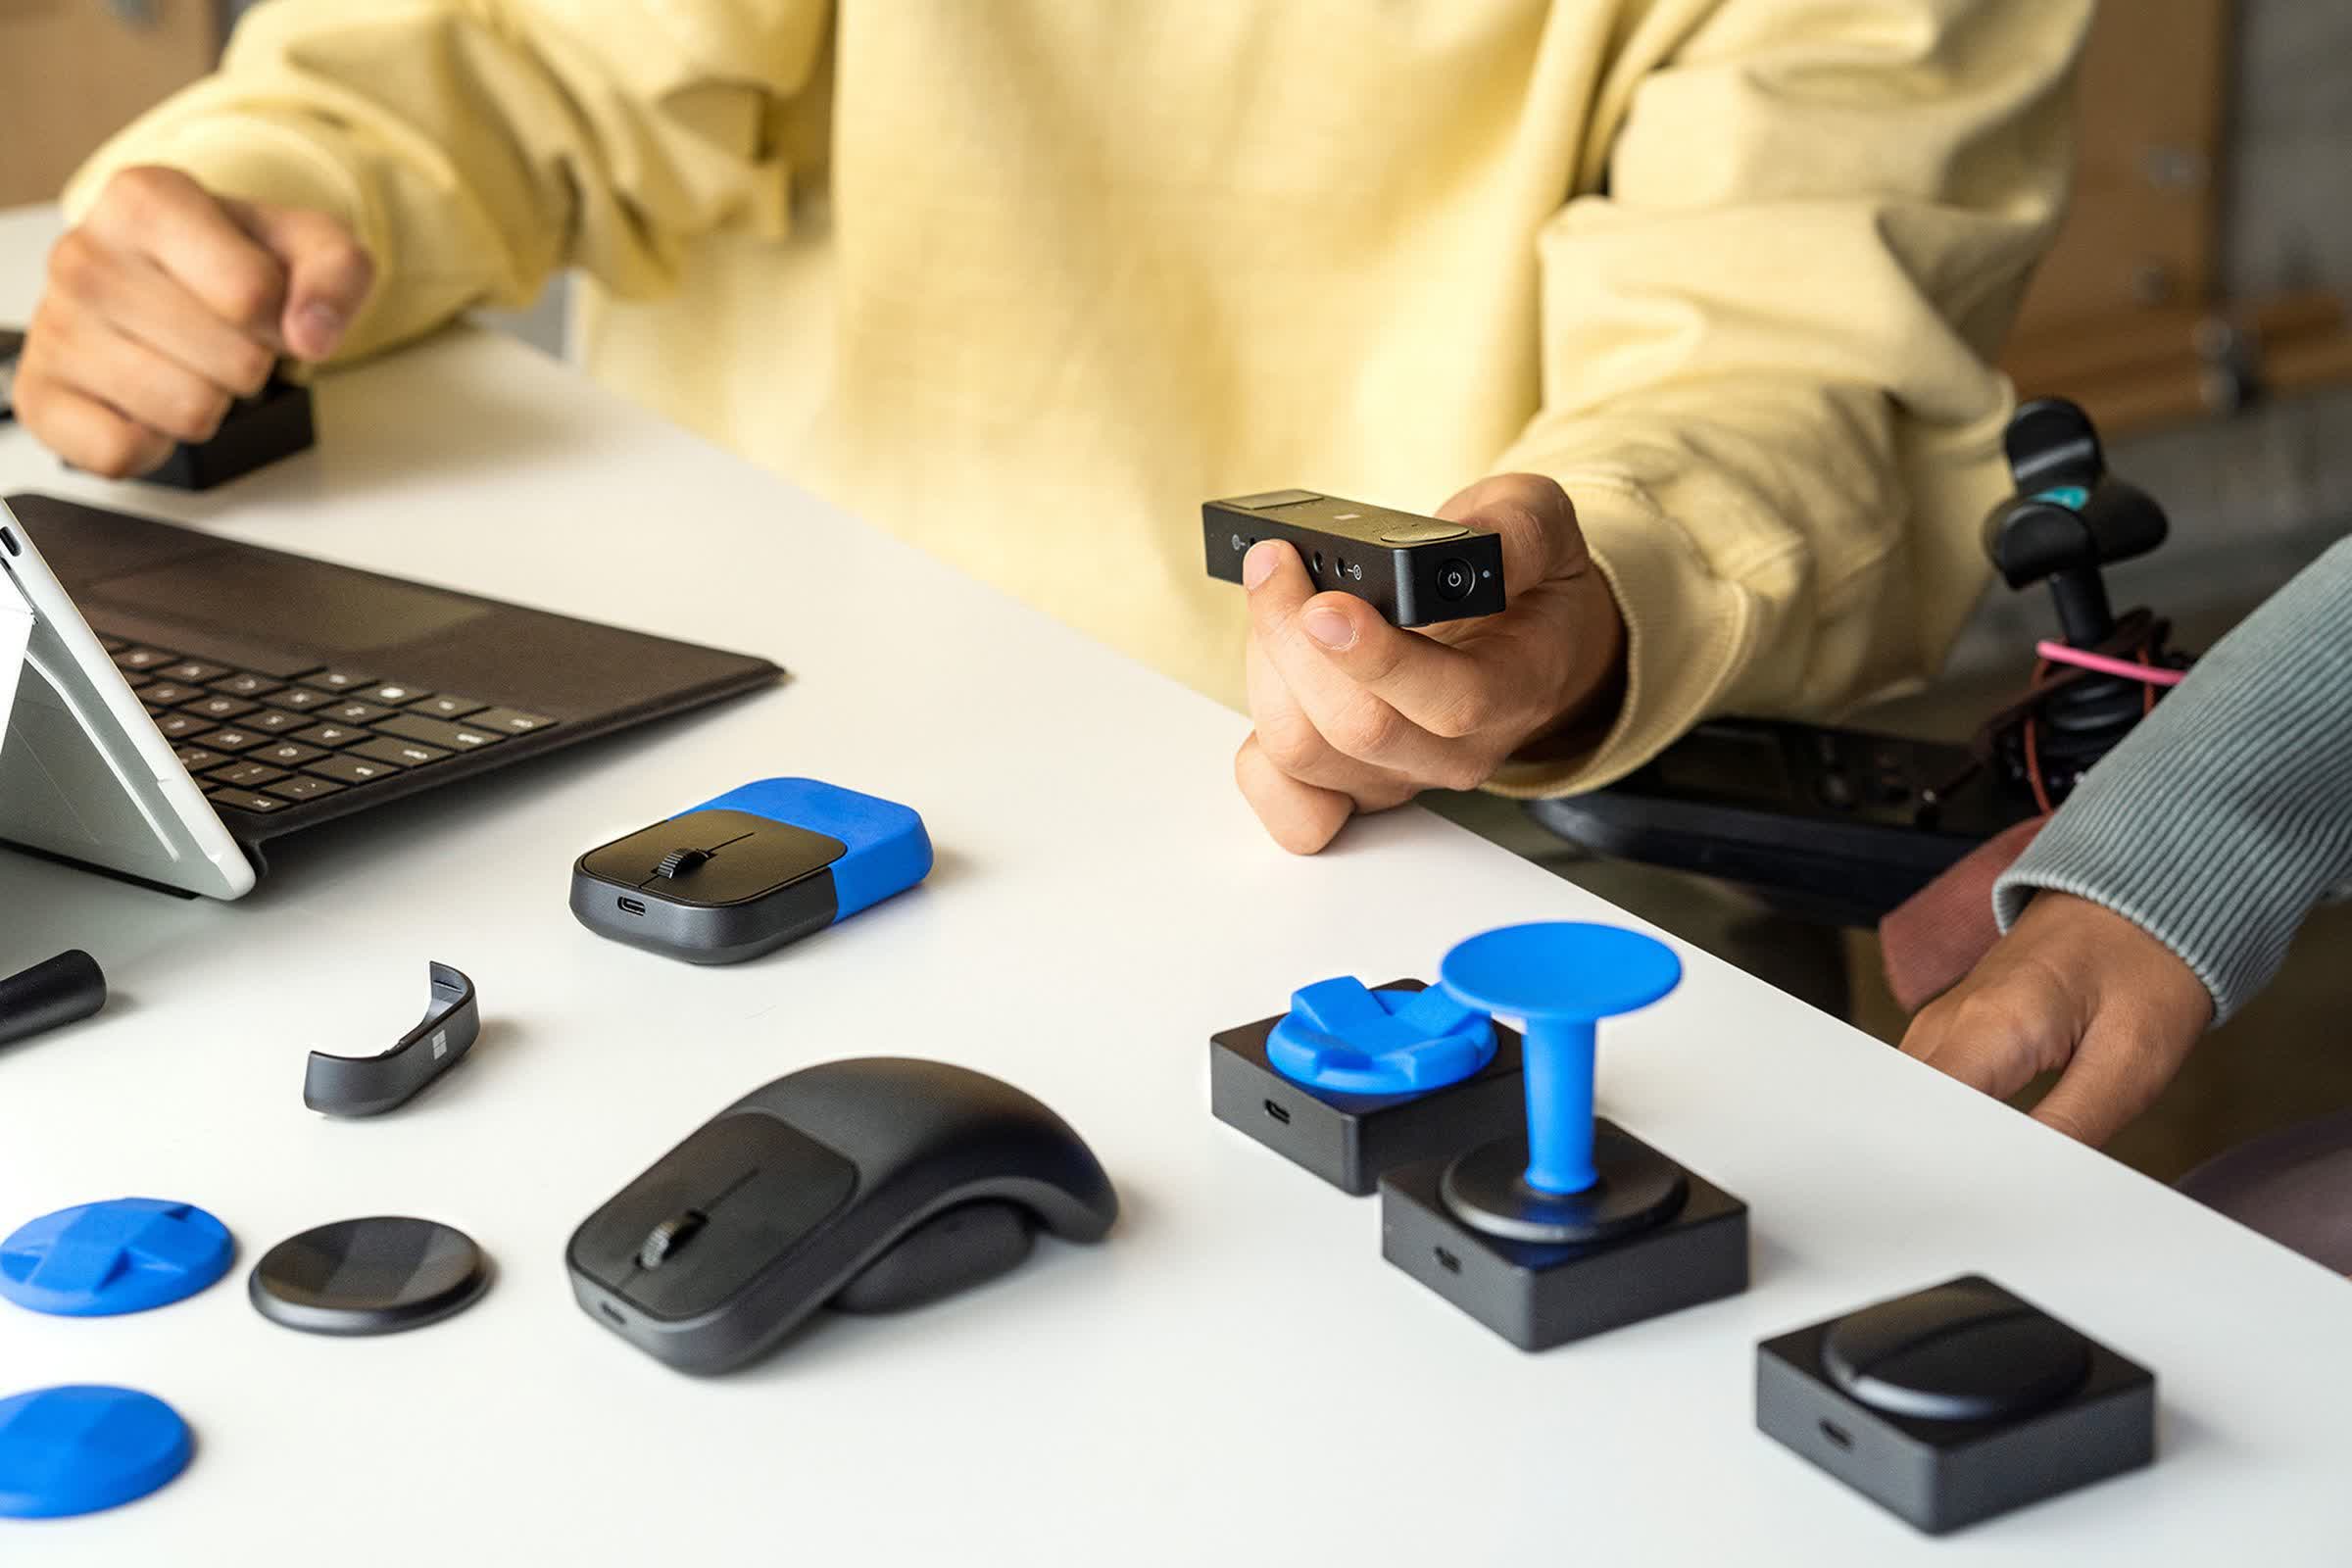 Microsoft's adaptive accessories arrive on October 25